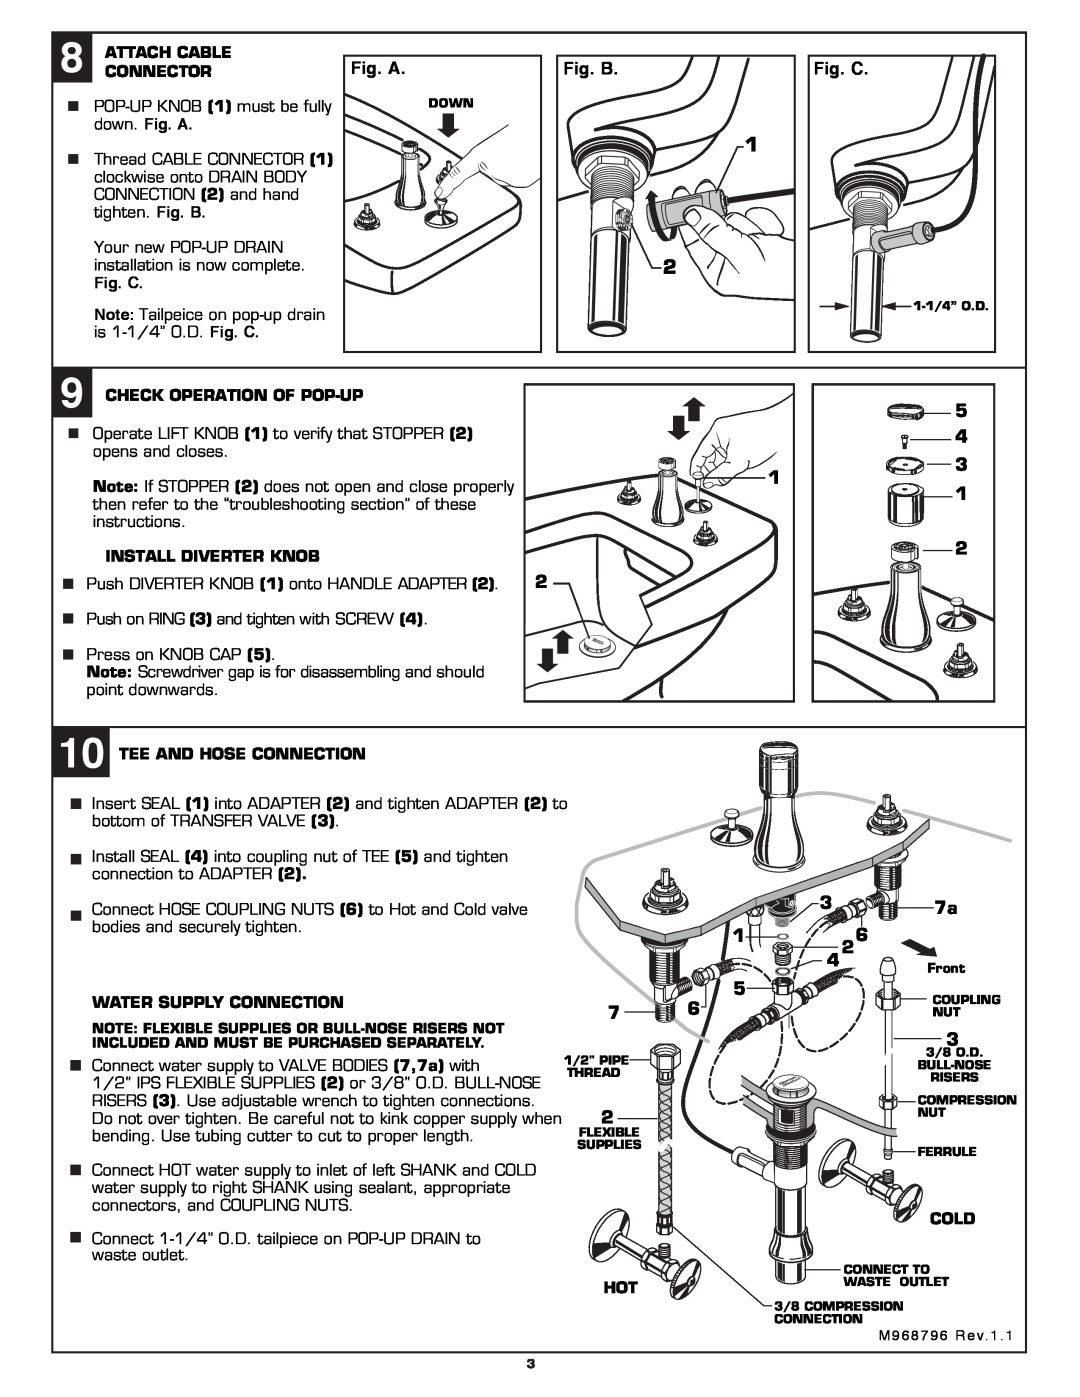 American Standard 3475.501, 3475.301 installation instructions Fig. A 